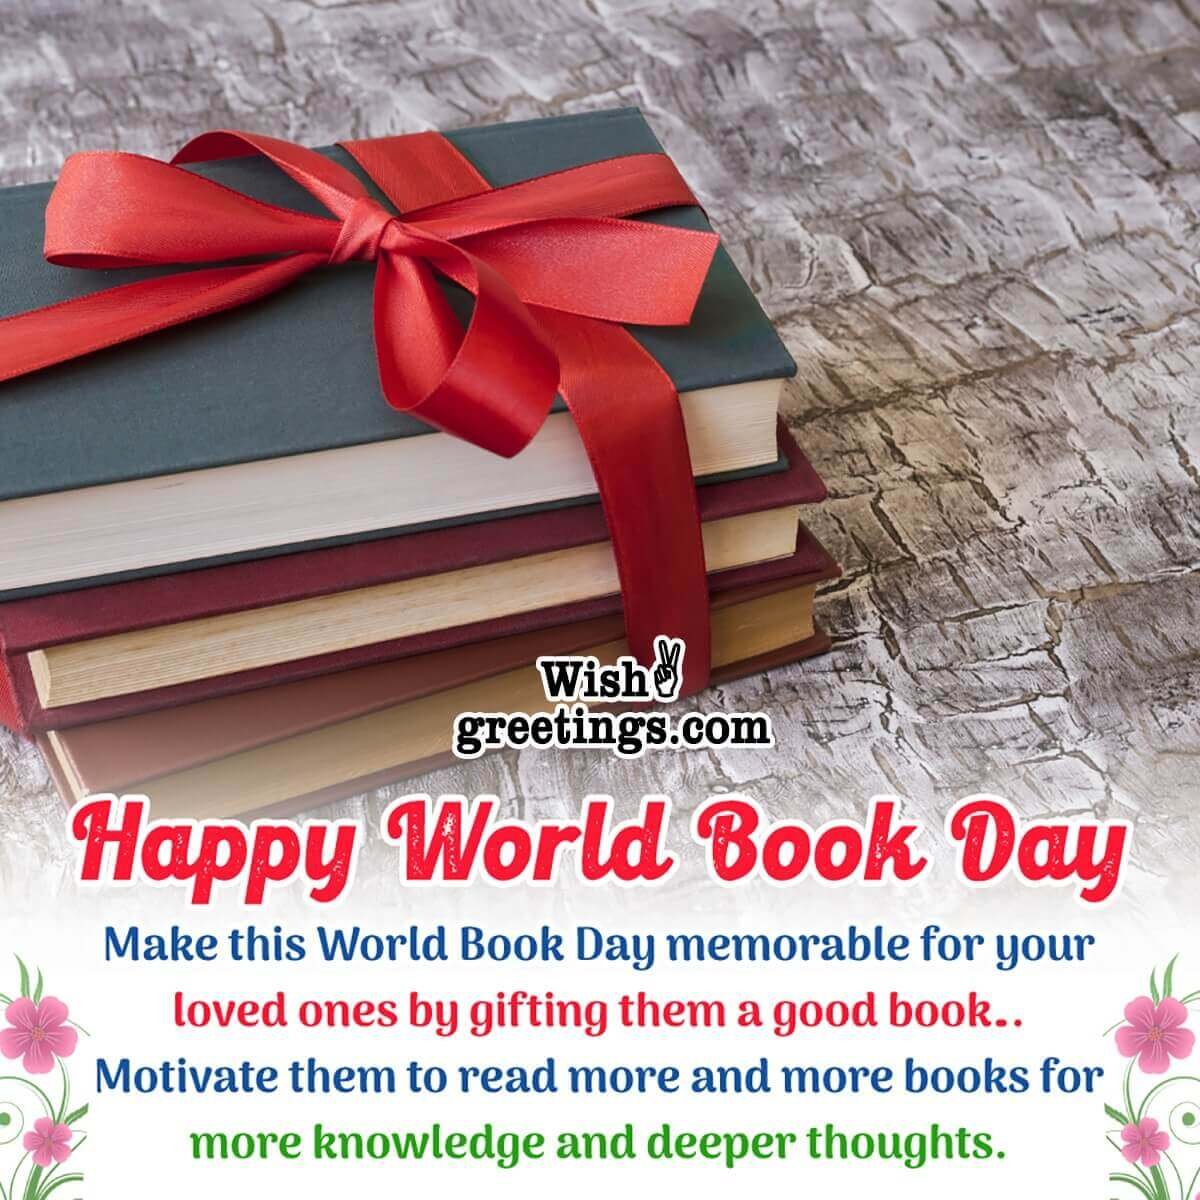 Happy World Book Day Message Image